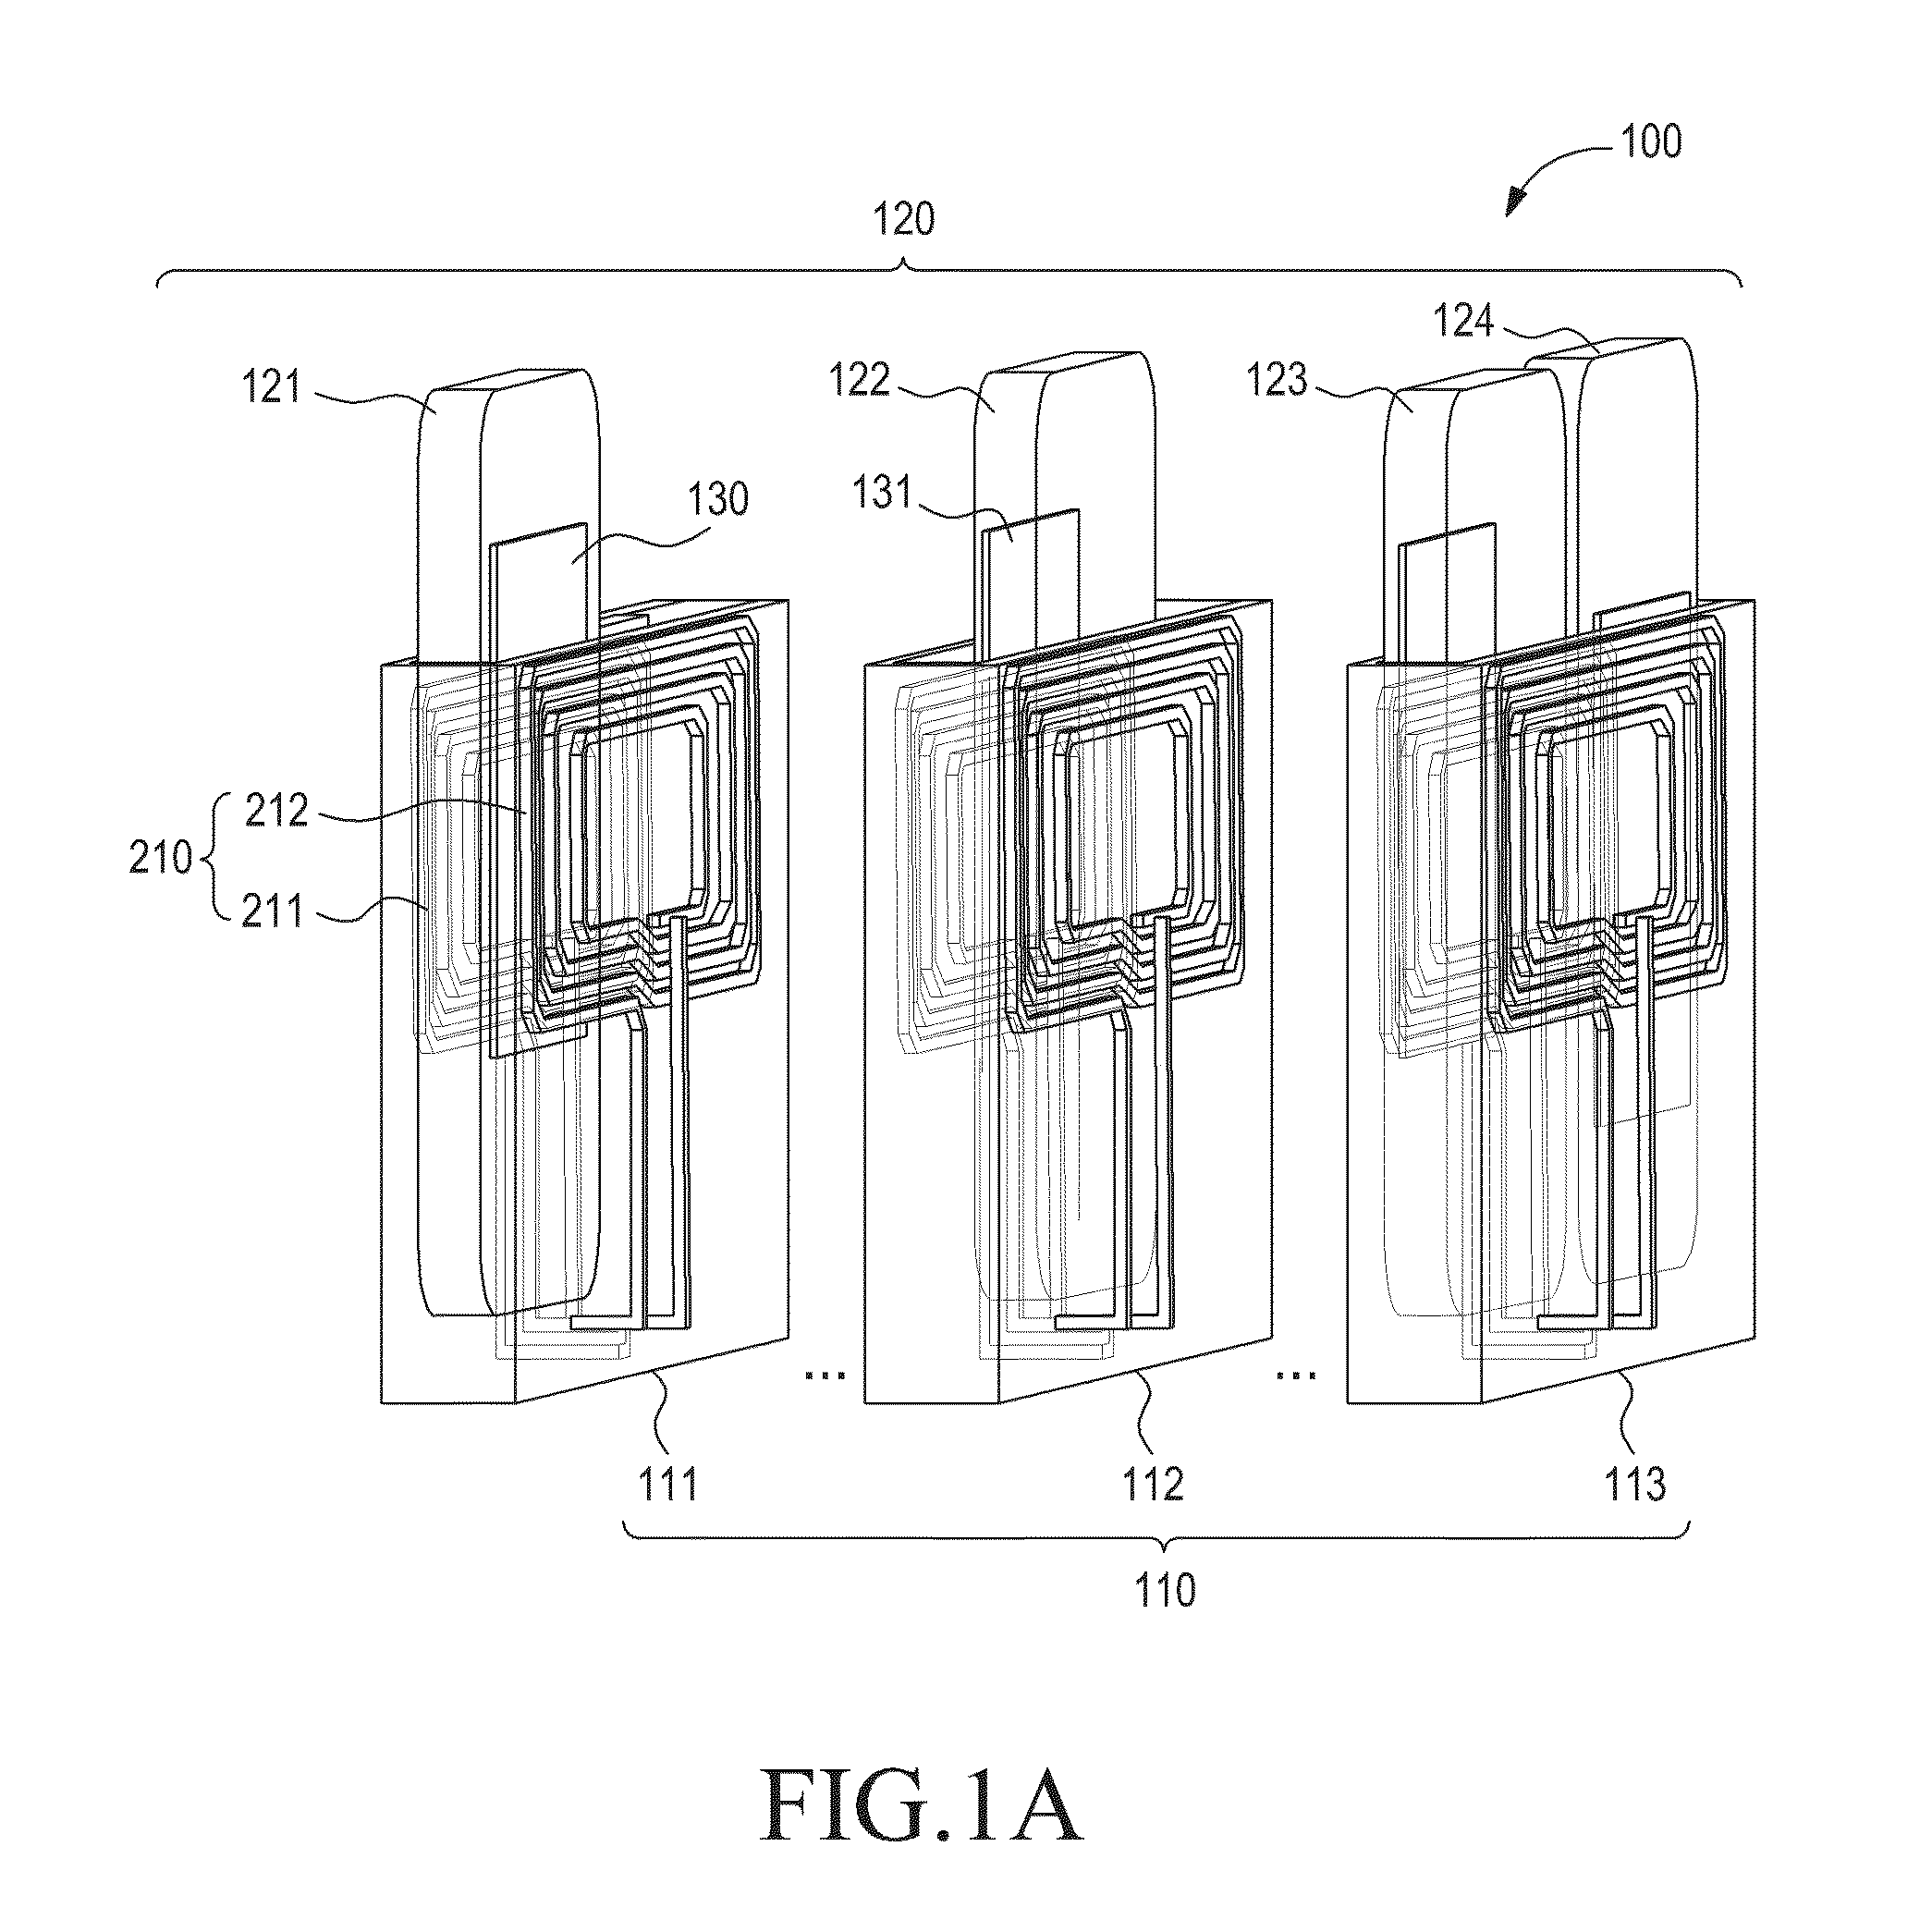 Wireless charger for electronic device